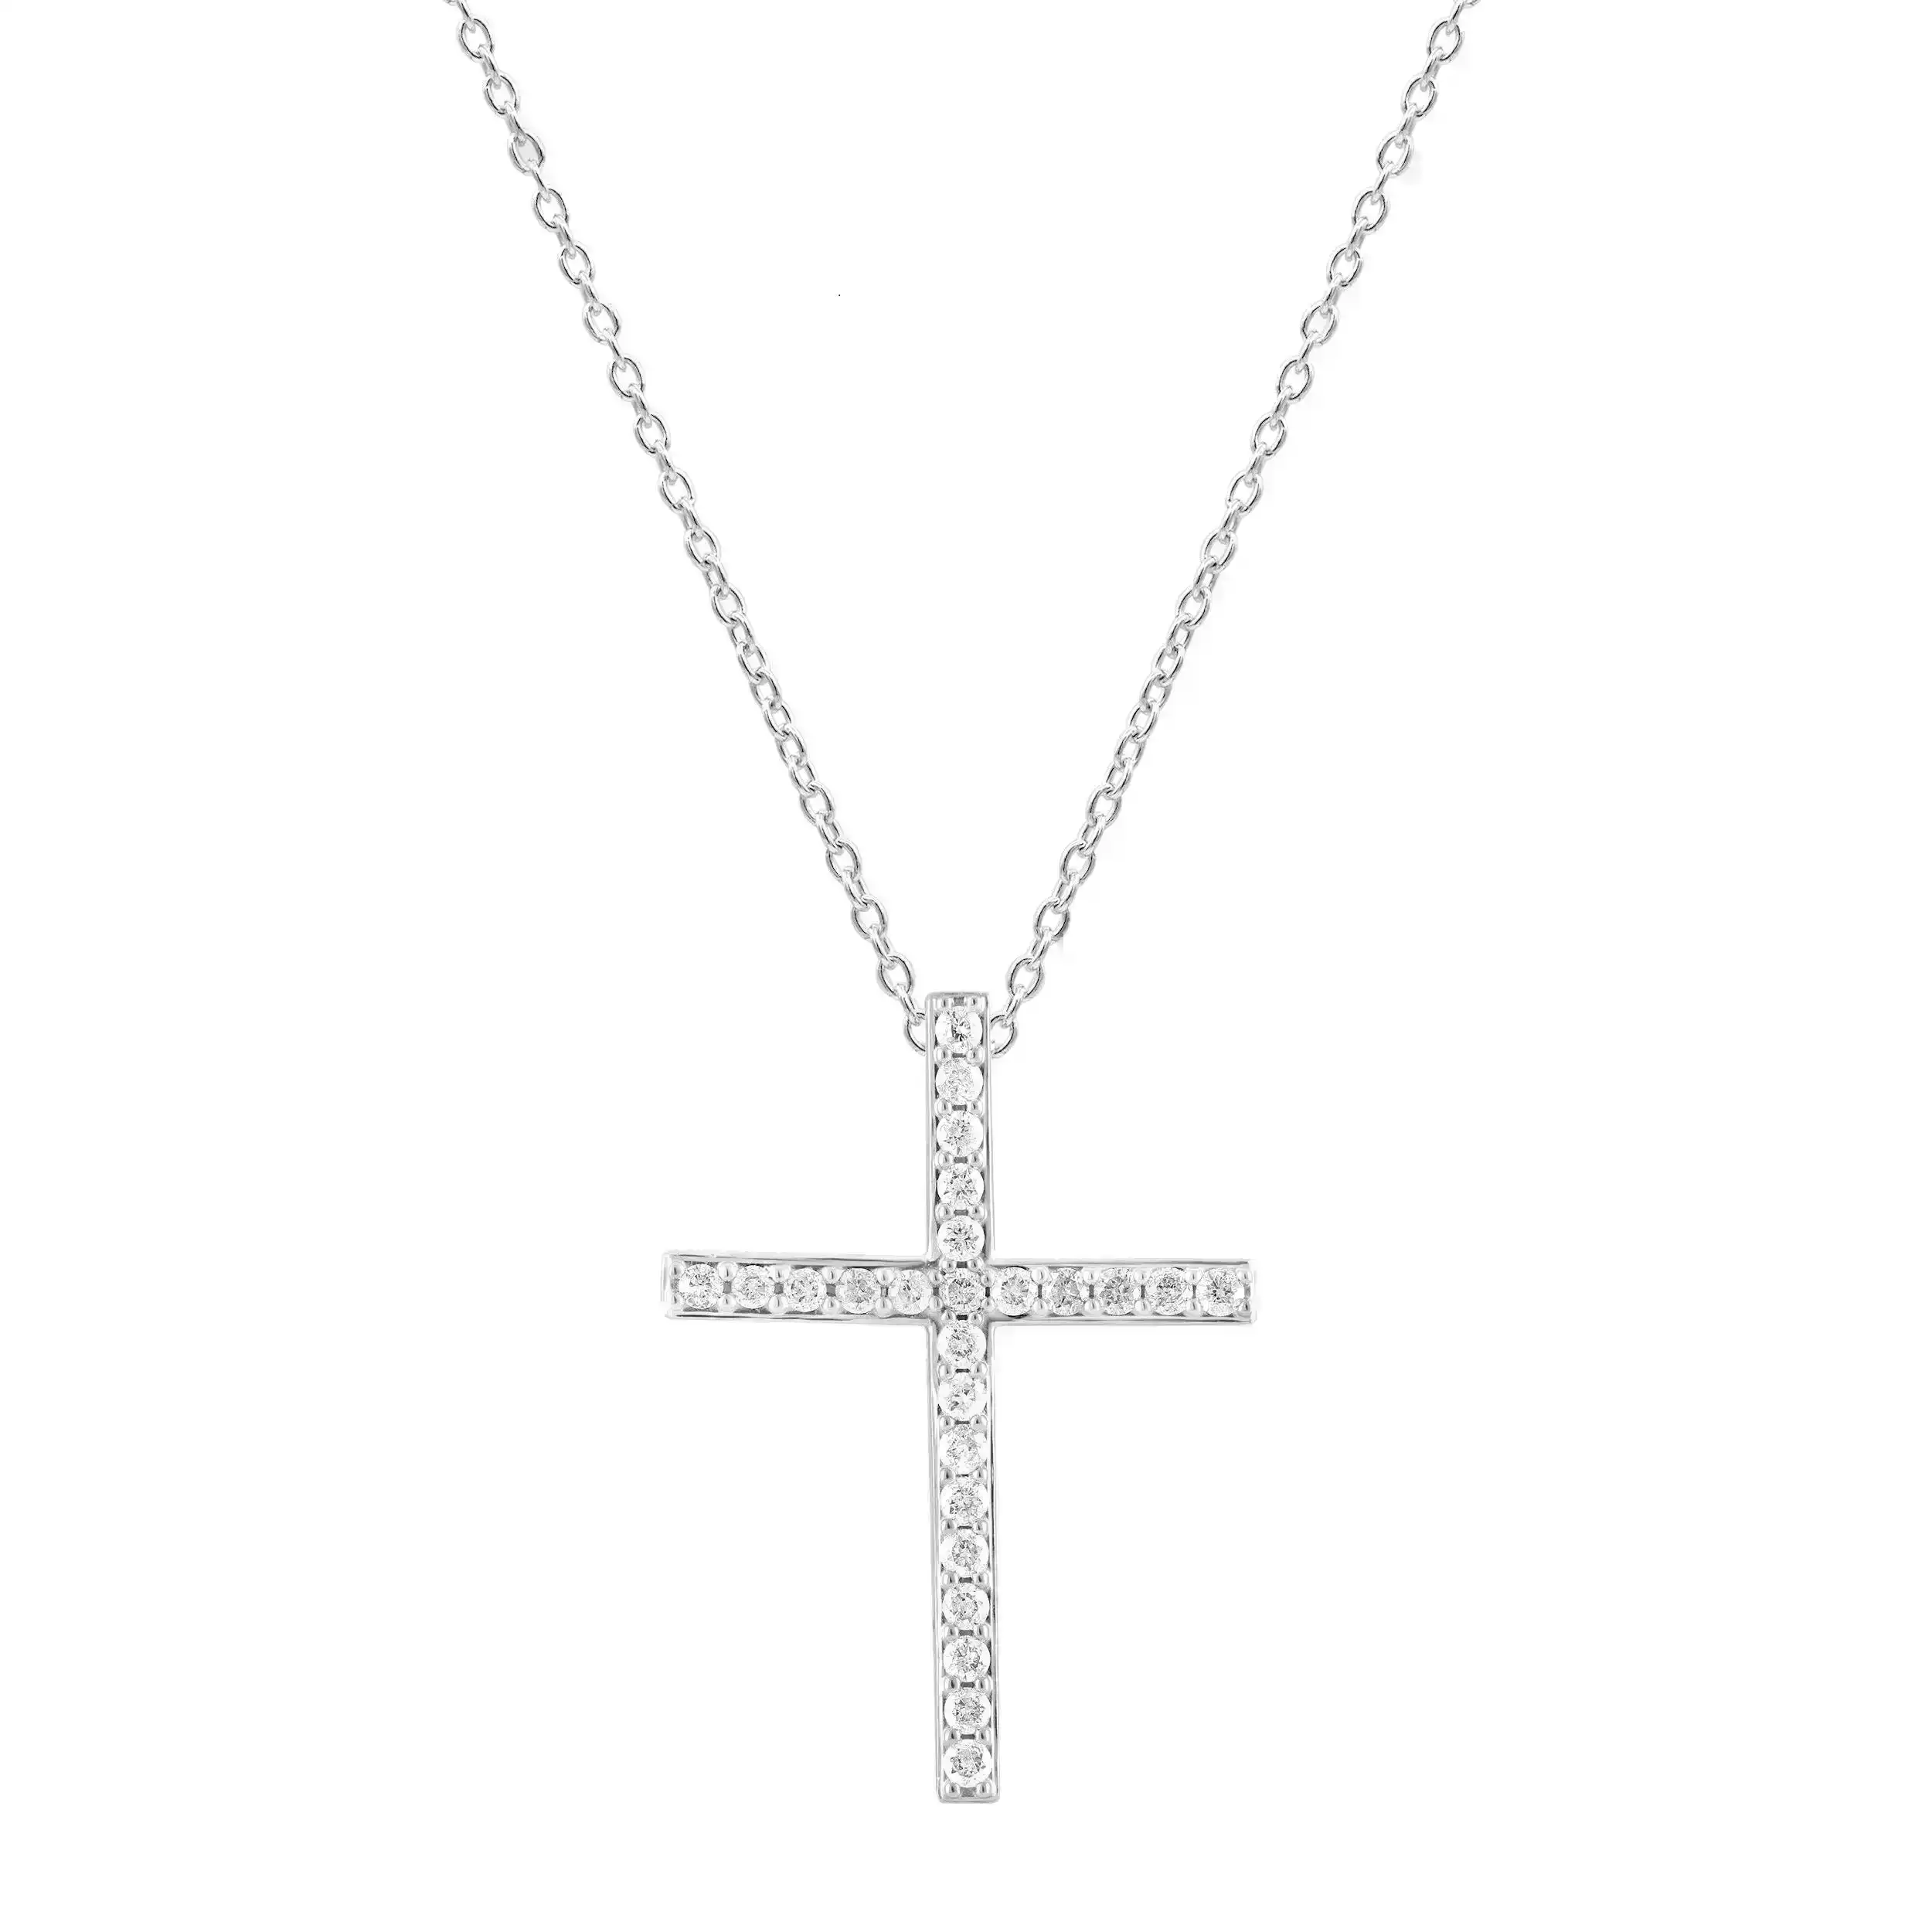 Cross Pendant with 1/4ct of Diamonds in 9ct White Gold with Sterling Silver Necklace